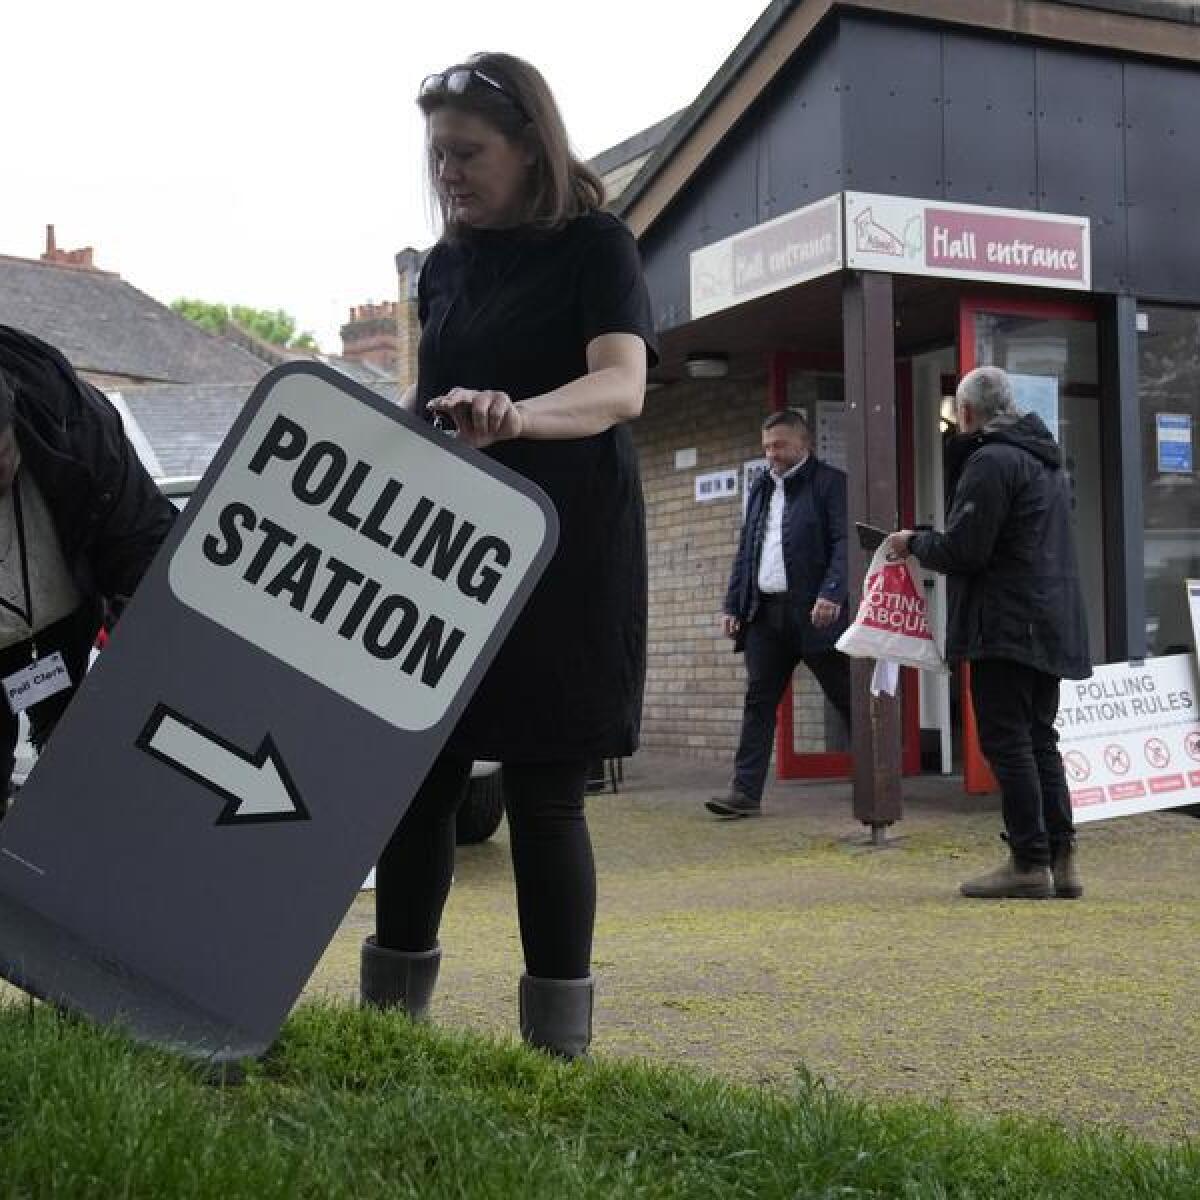 Polling station officials put out a sign as it opens in London